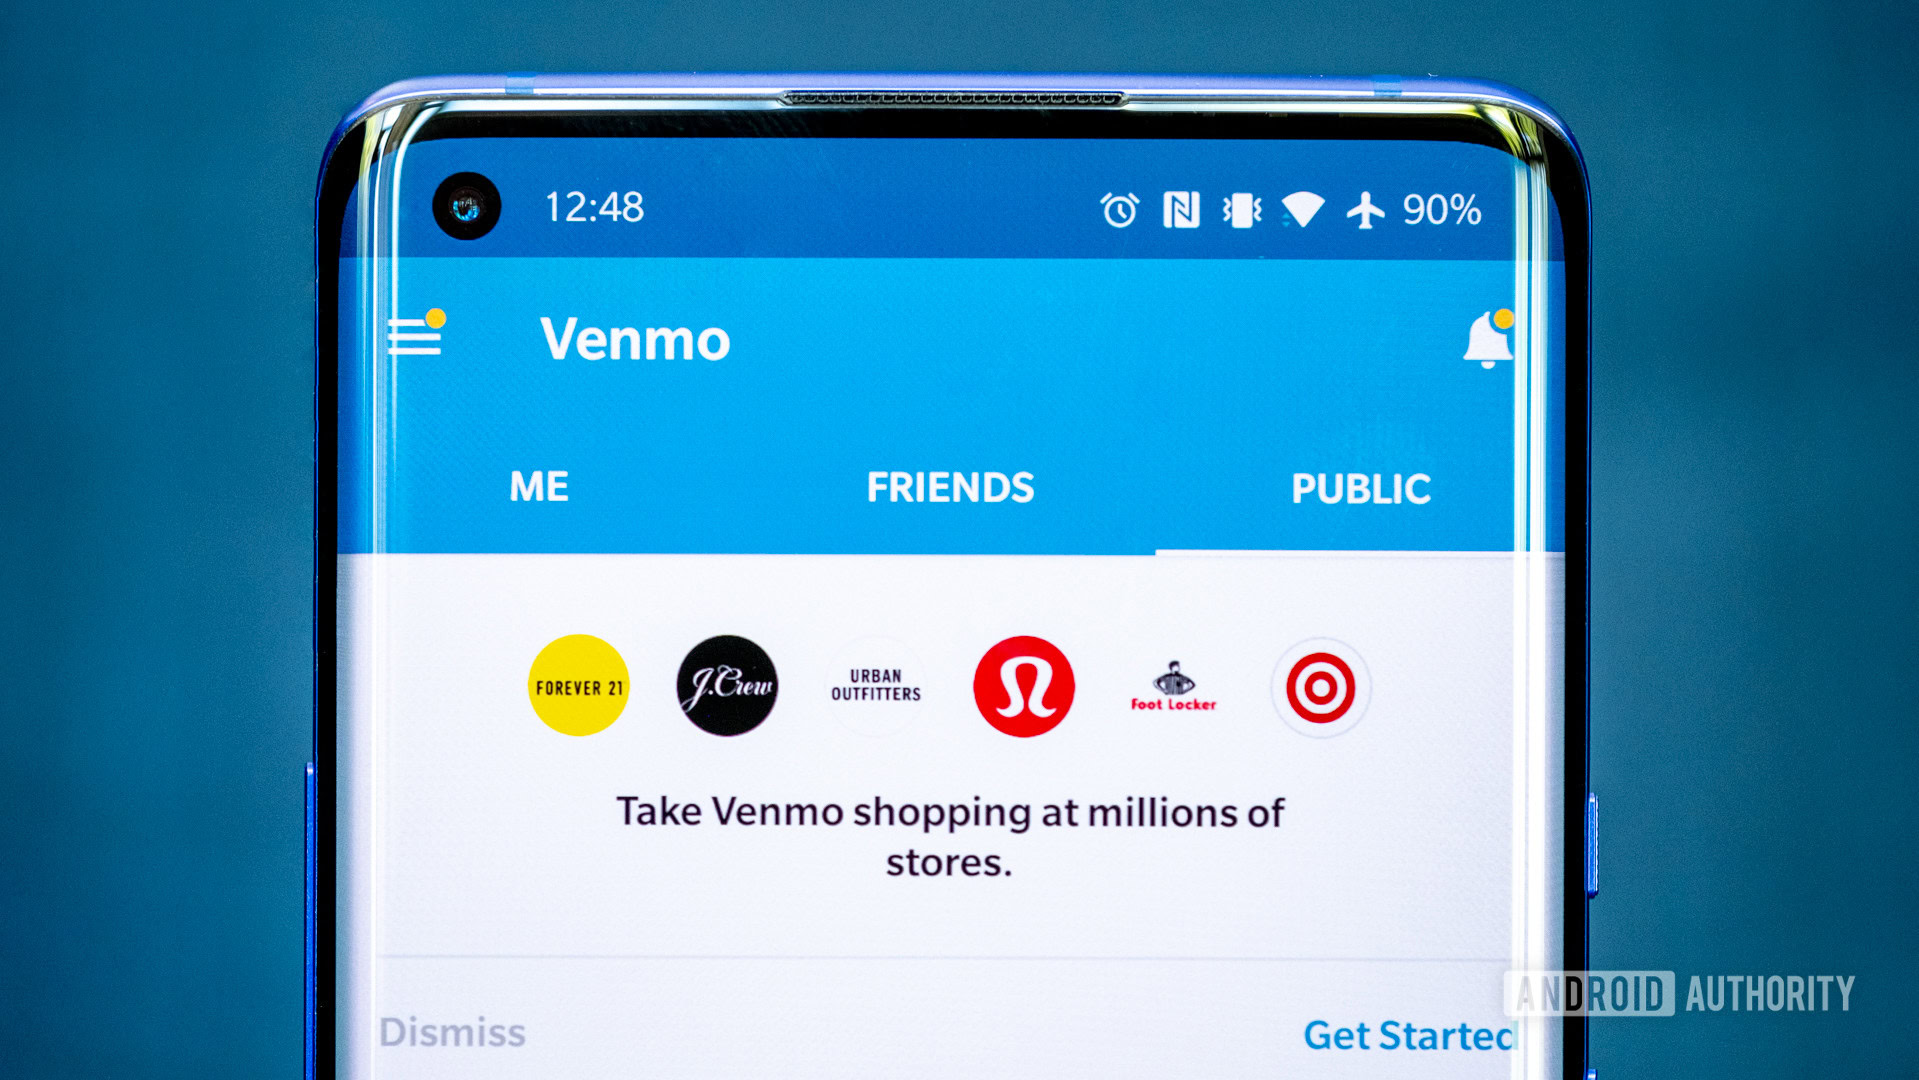 does venmo charge a fee to send or receive money